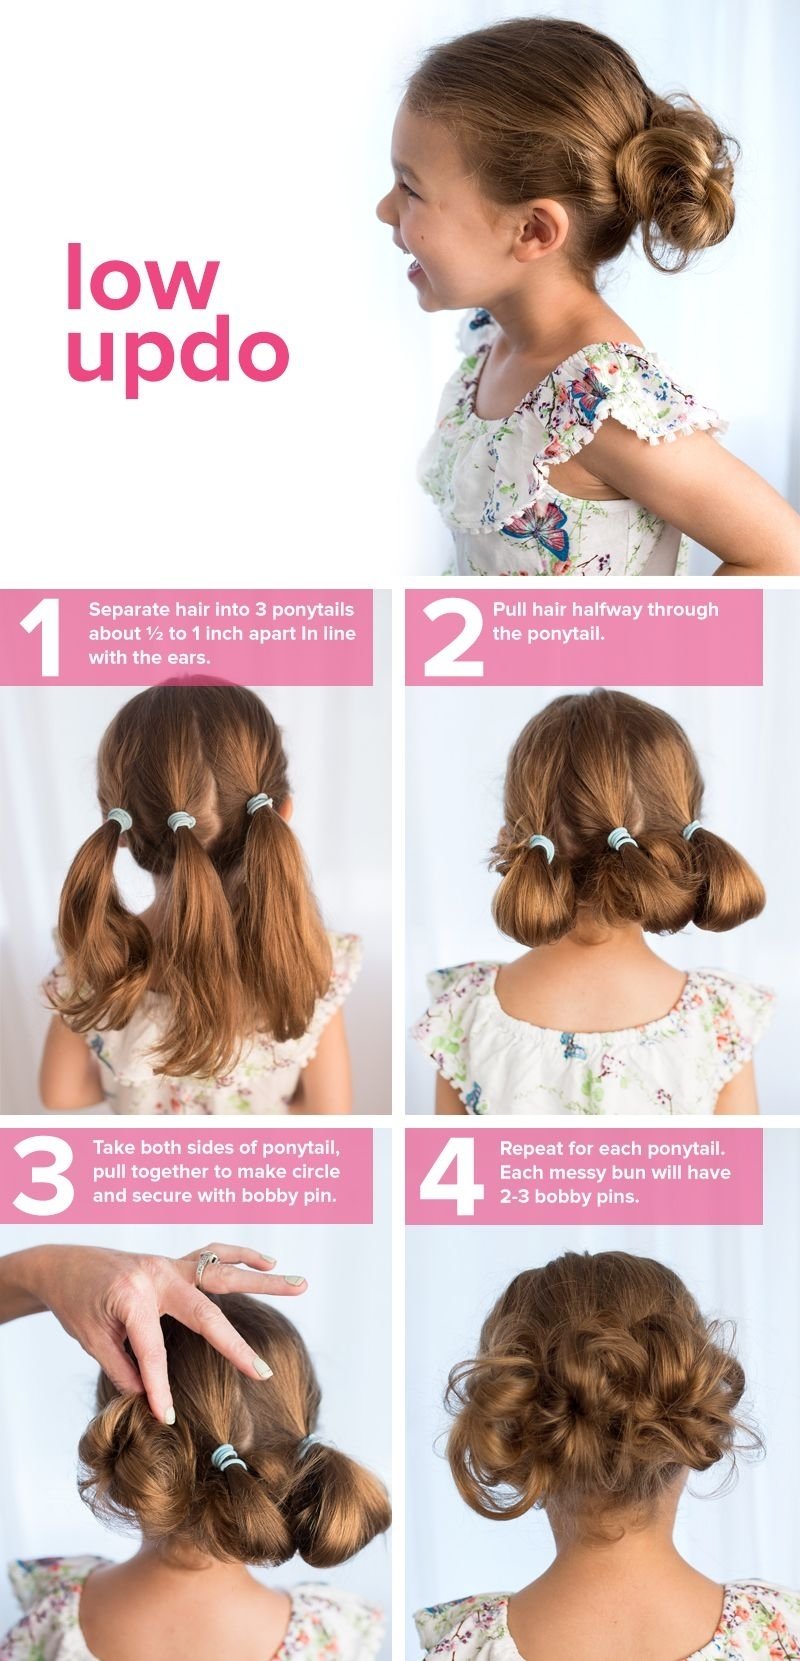 10 Elegant Cute Hair Ideas For School 5 fast easy cute hairstyles for girls low updo updo and kids s 2022